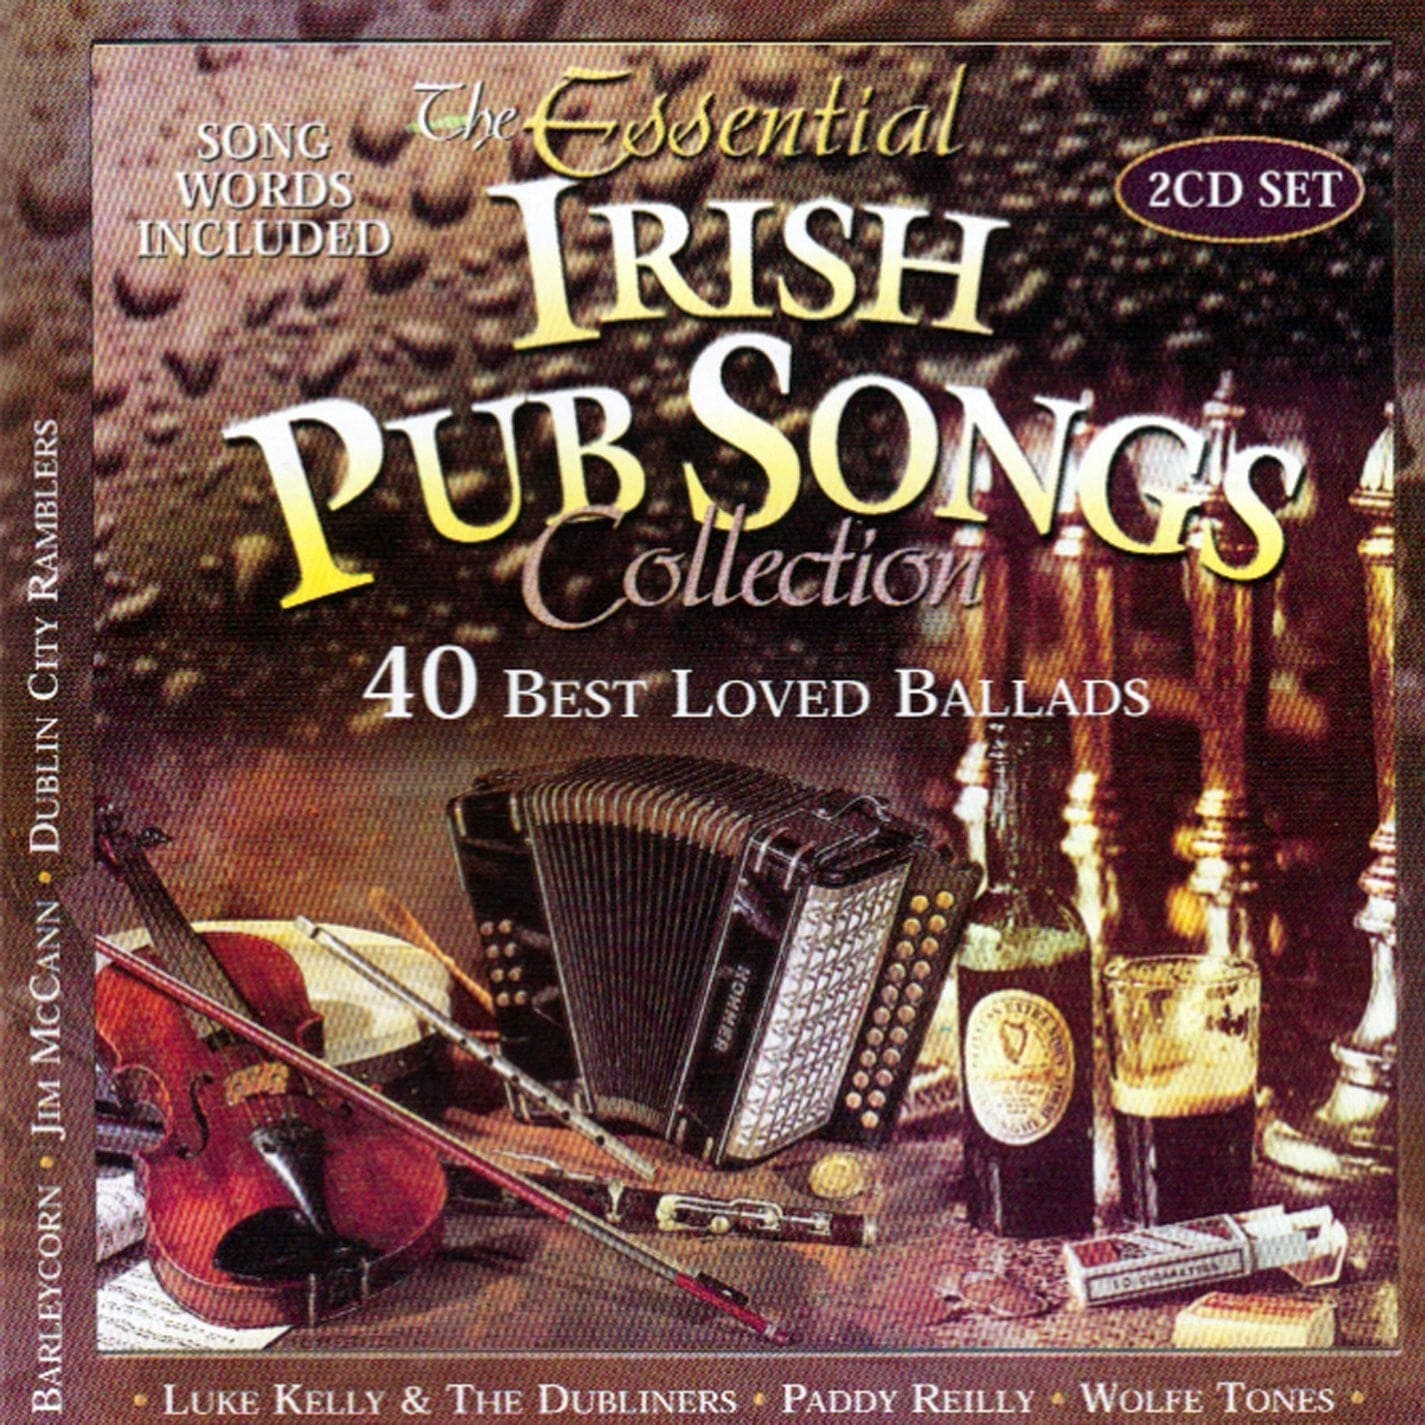 The Essential Irish Pub Songs Collection - Various Artists [2CD]